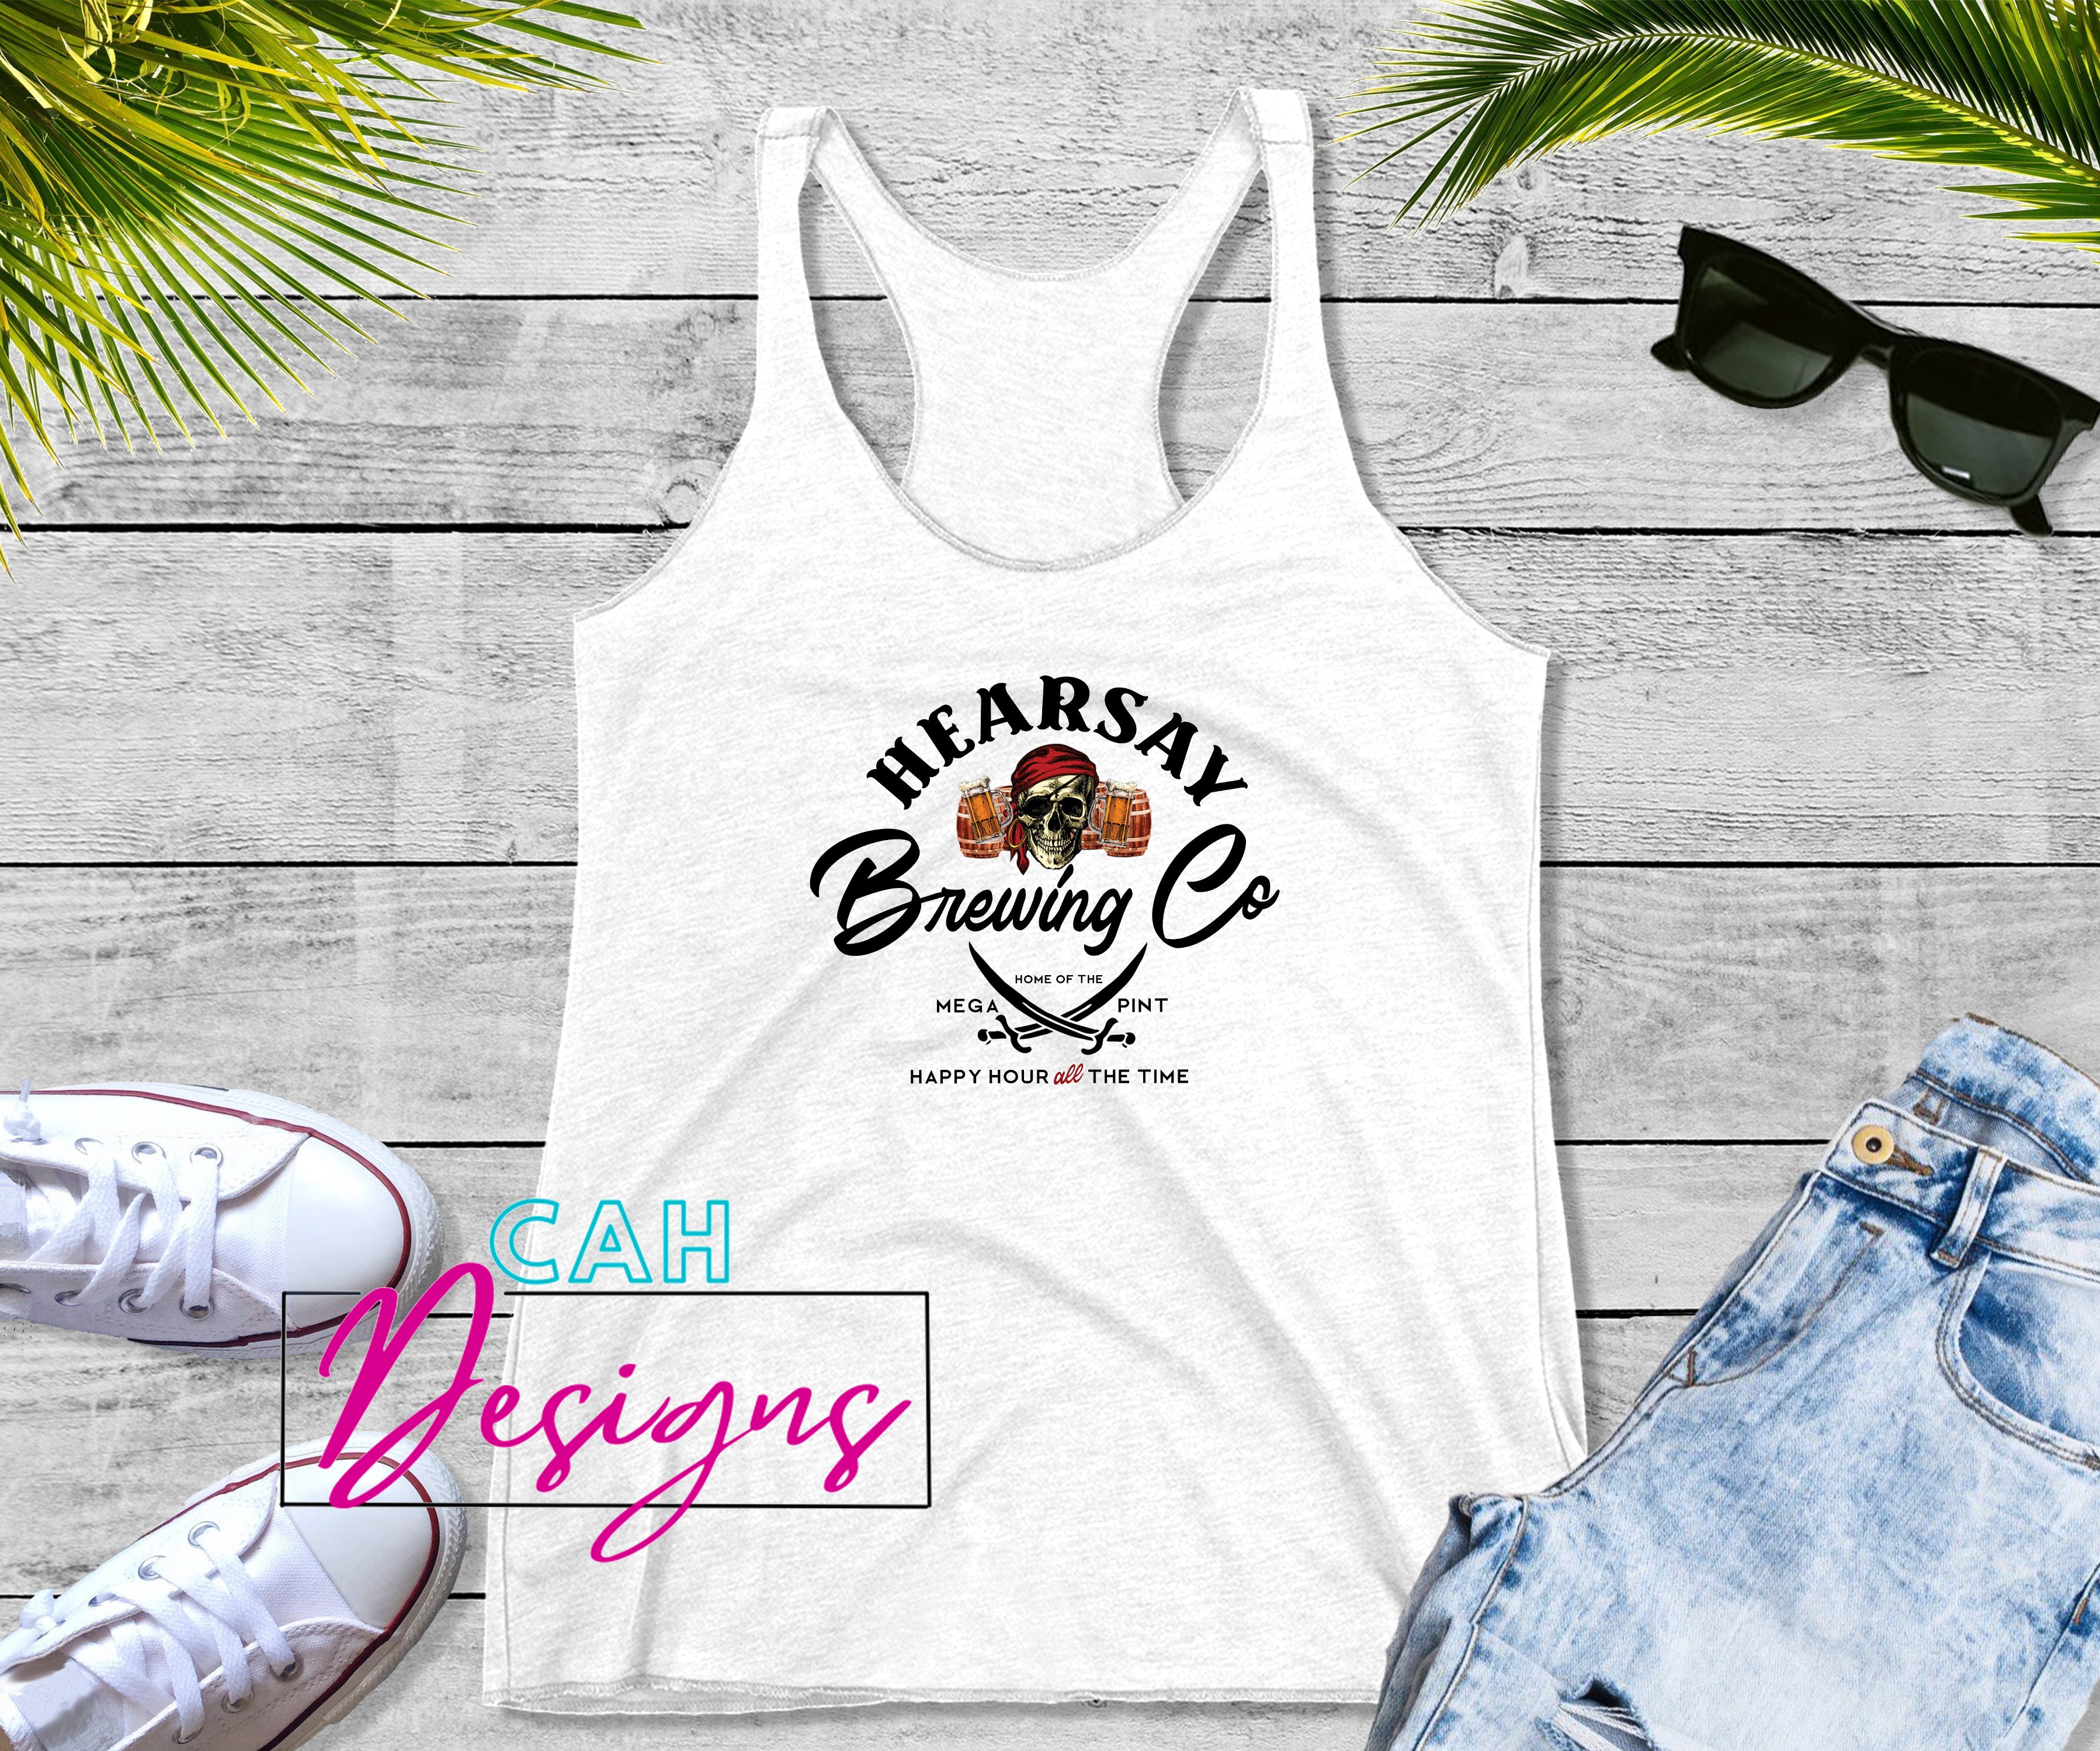 Hearsay Brewing Company Tank Top - Non Bleached